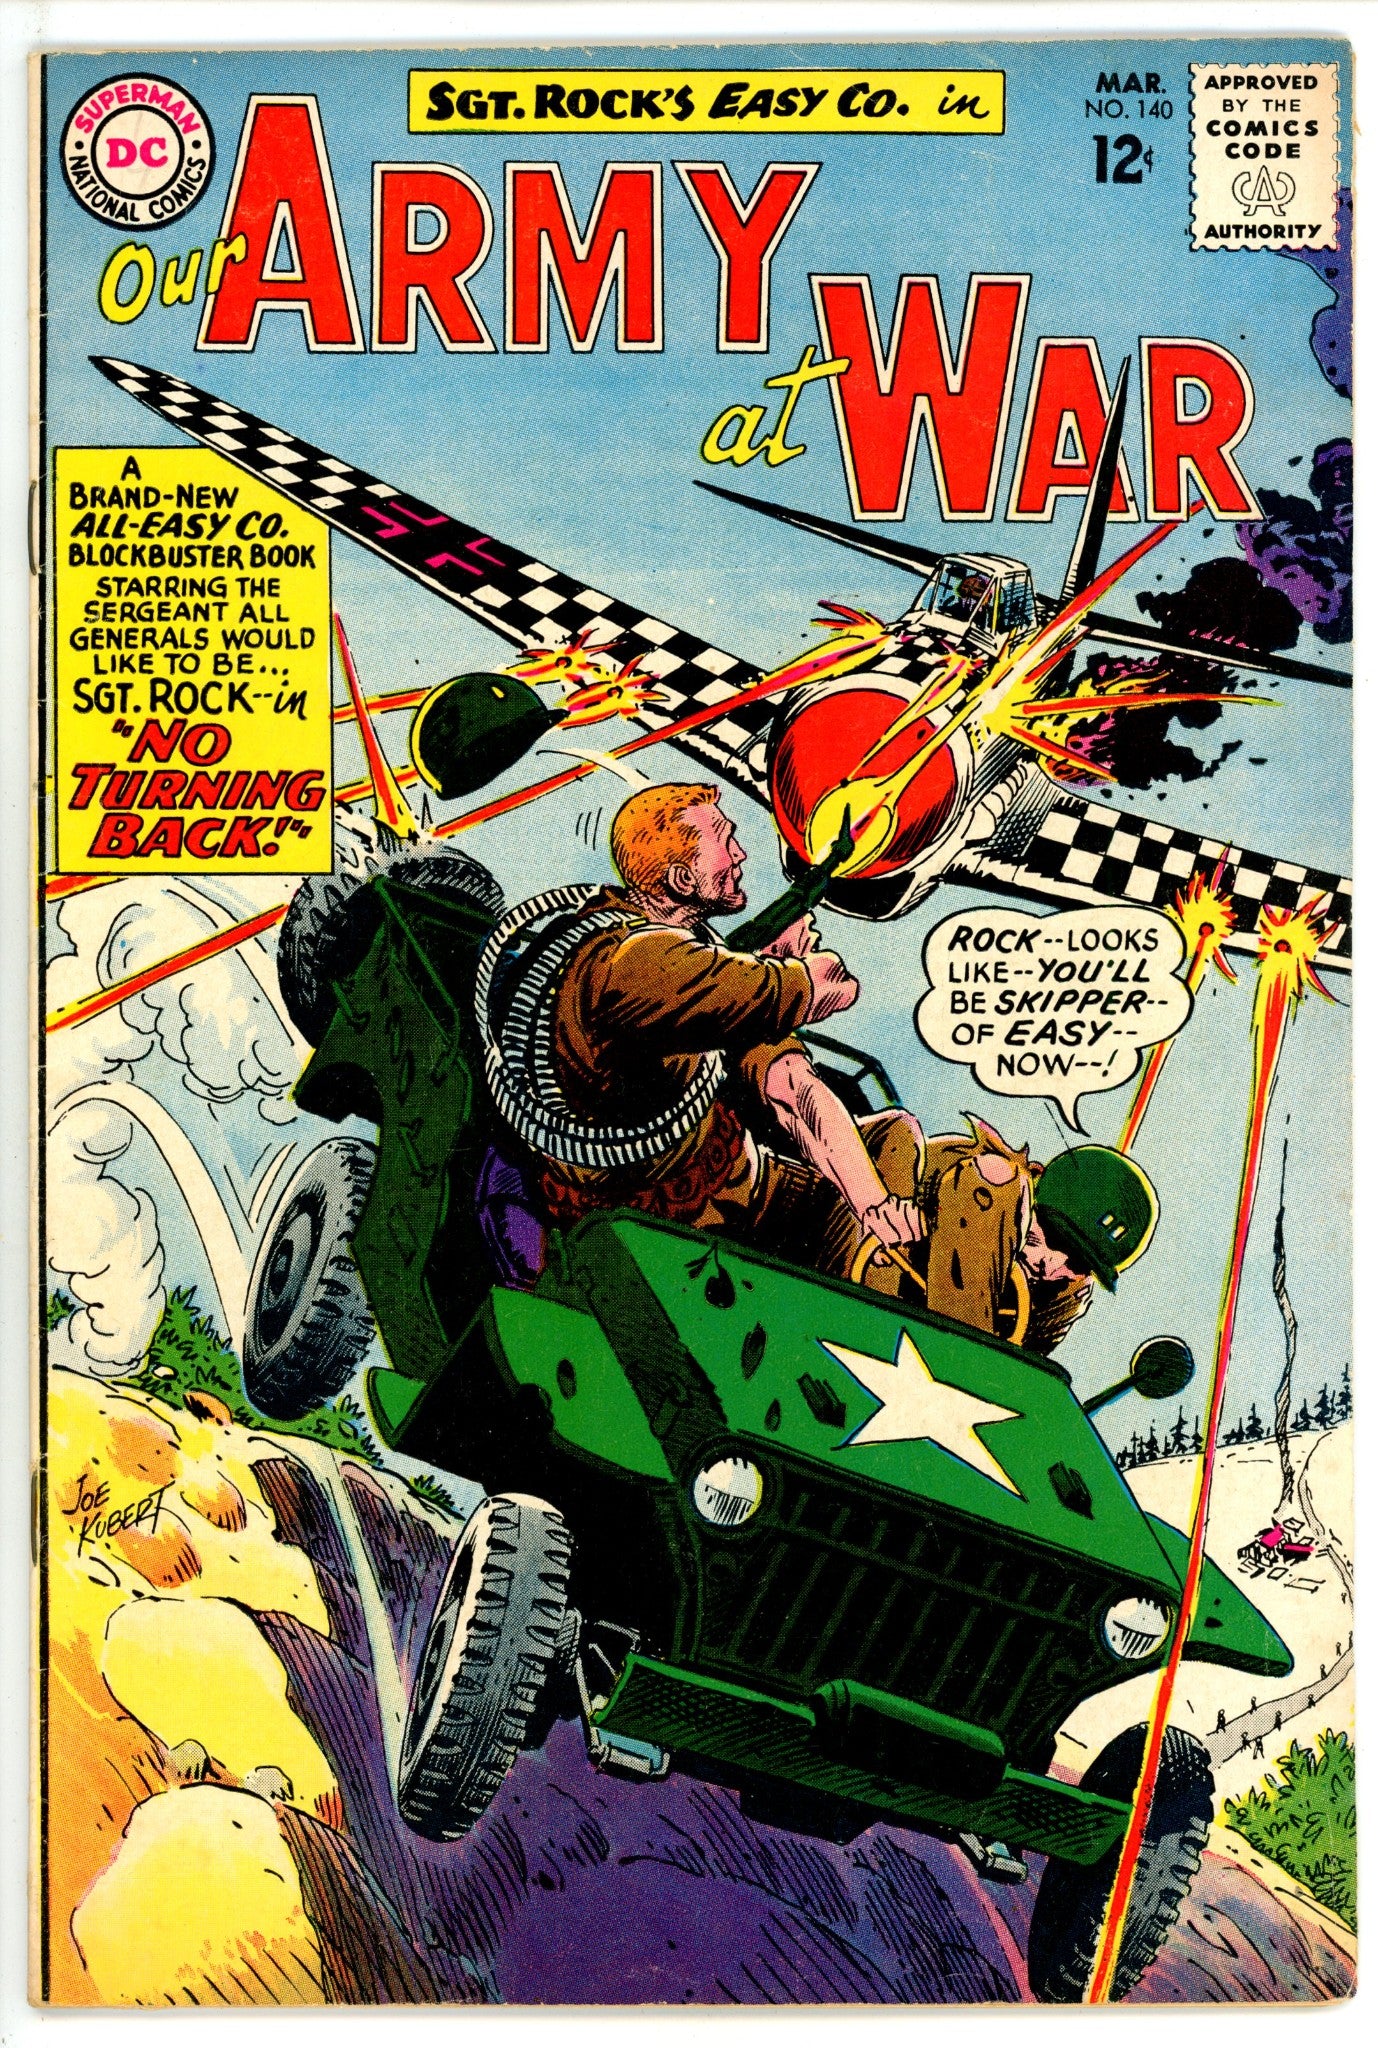 Our Army at War Vol 1 140 VG+ (4.5) (1964) 